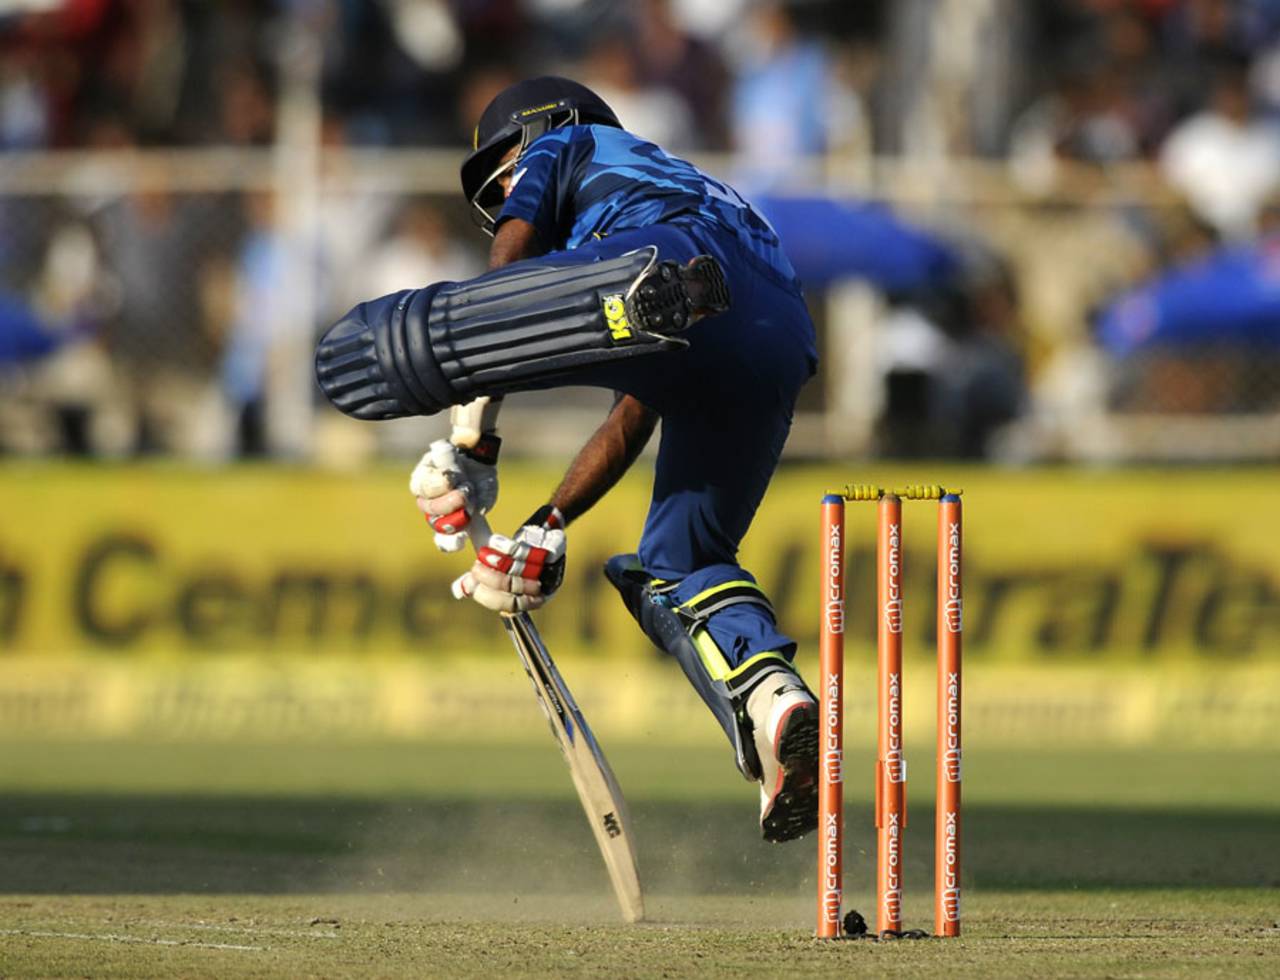 Angelo Mathews said he was "disappointed and embarrassed"  that Sri Lanka were not competitive enough&nbsp;&nbsp;&bull;&nbsp;&nbsp;BCCI